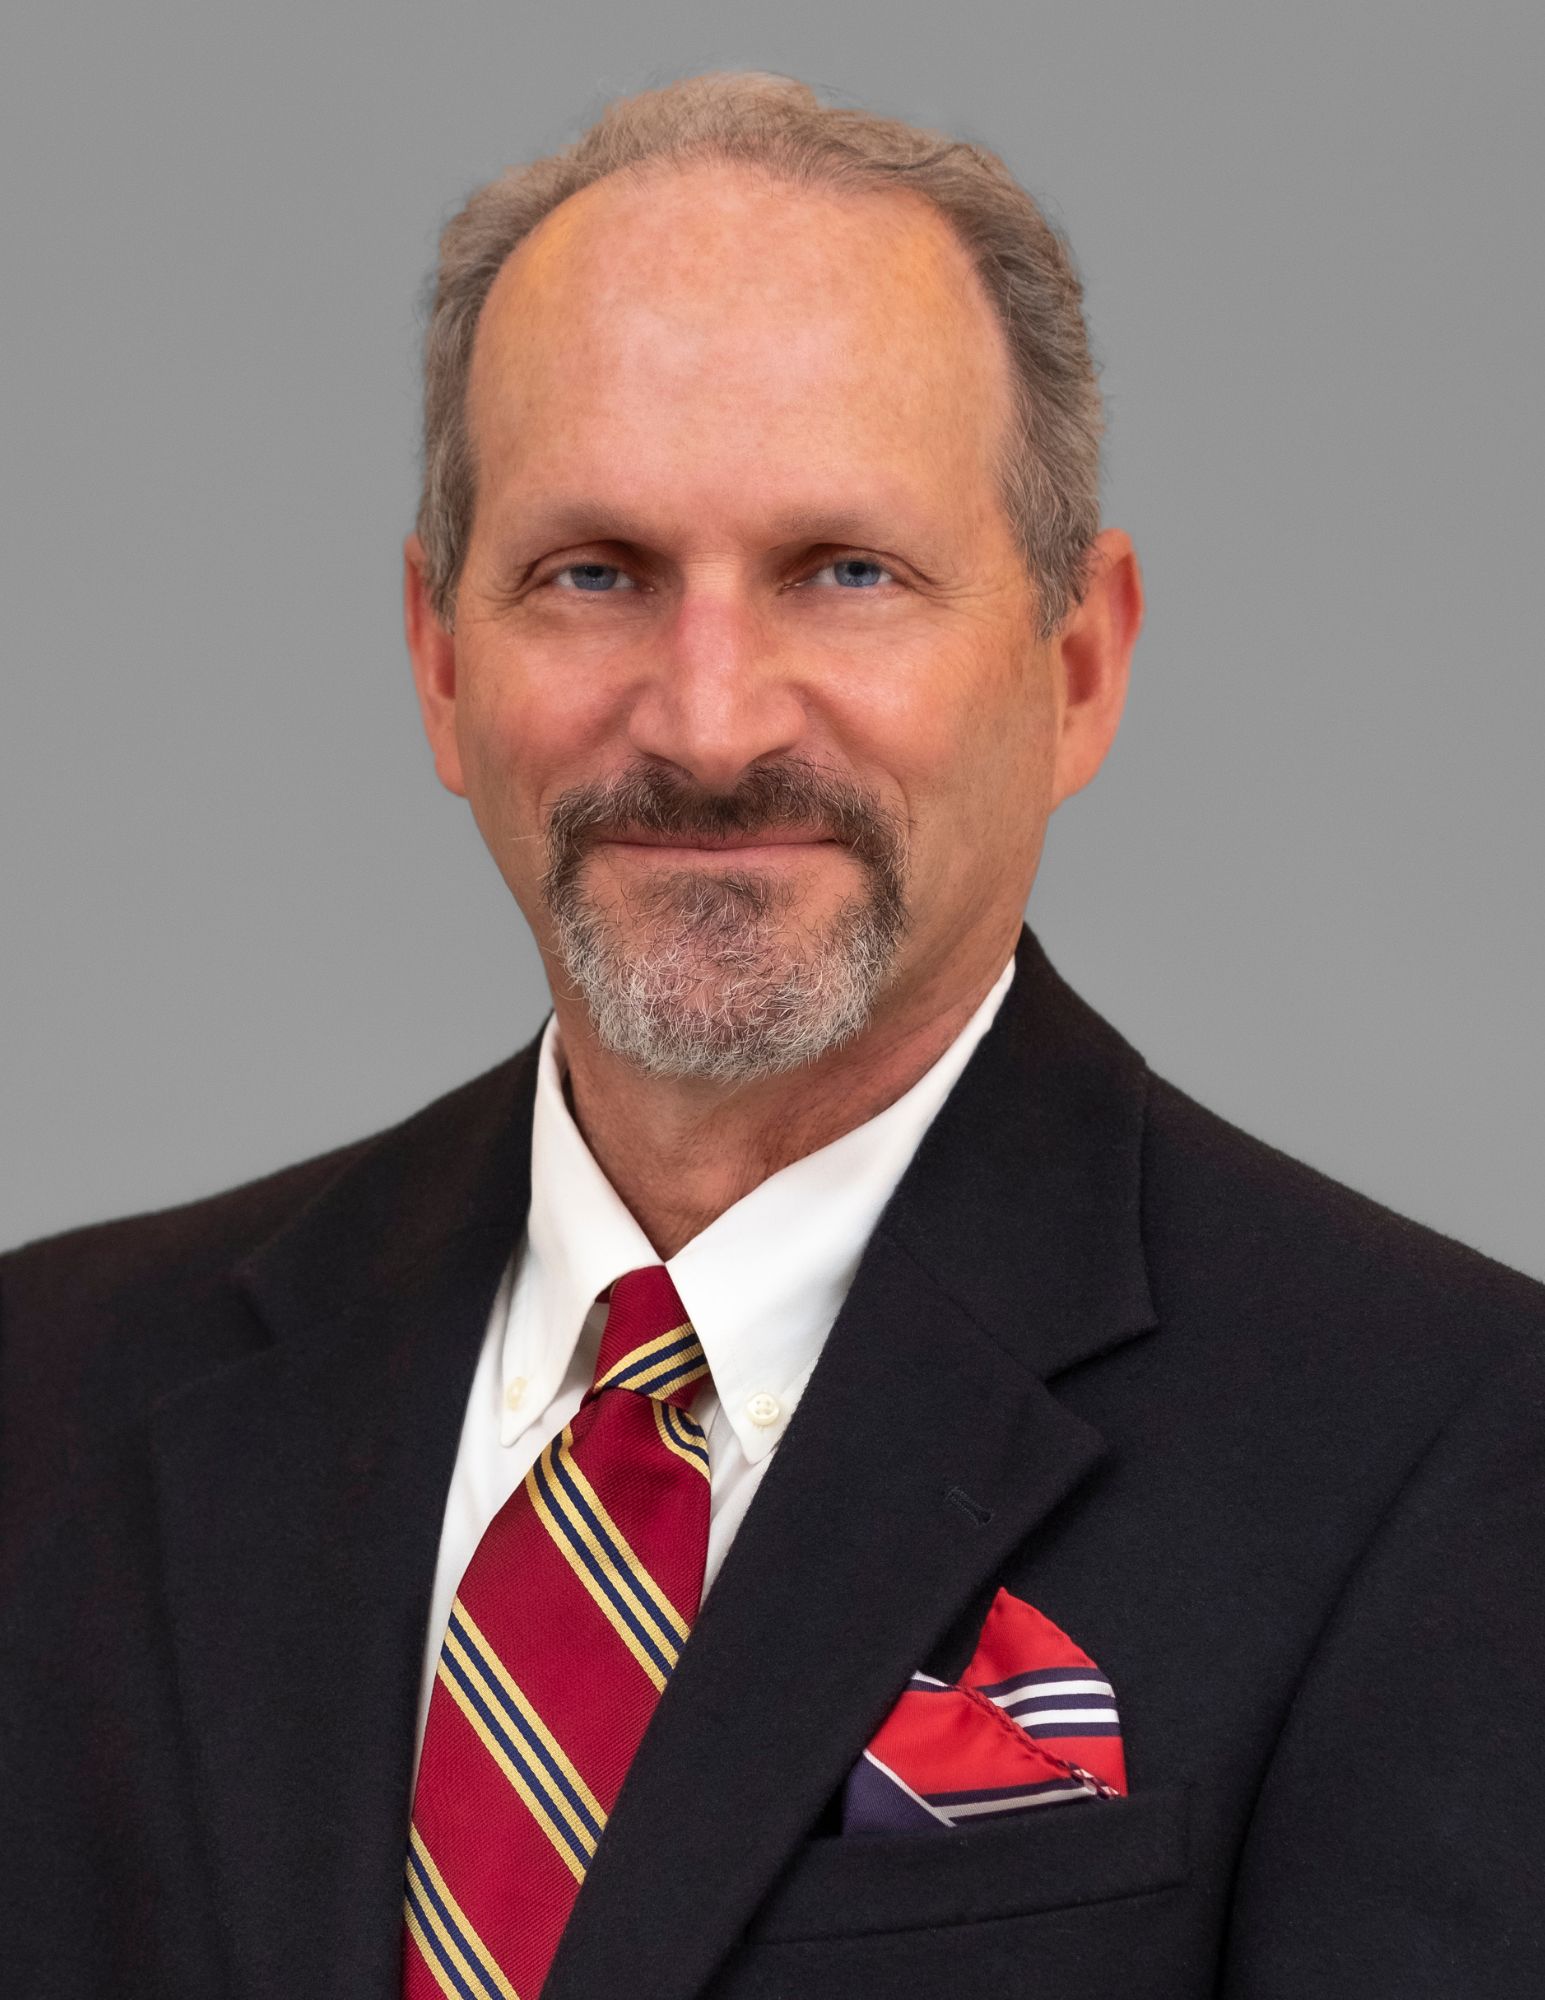 This image shows a man with short, gray hair with a beard. He is wearing a black suit jacket, a white dress shirt, and a red patterned tie. He is smiling and is posing against a plain gray background.